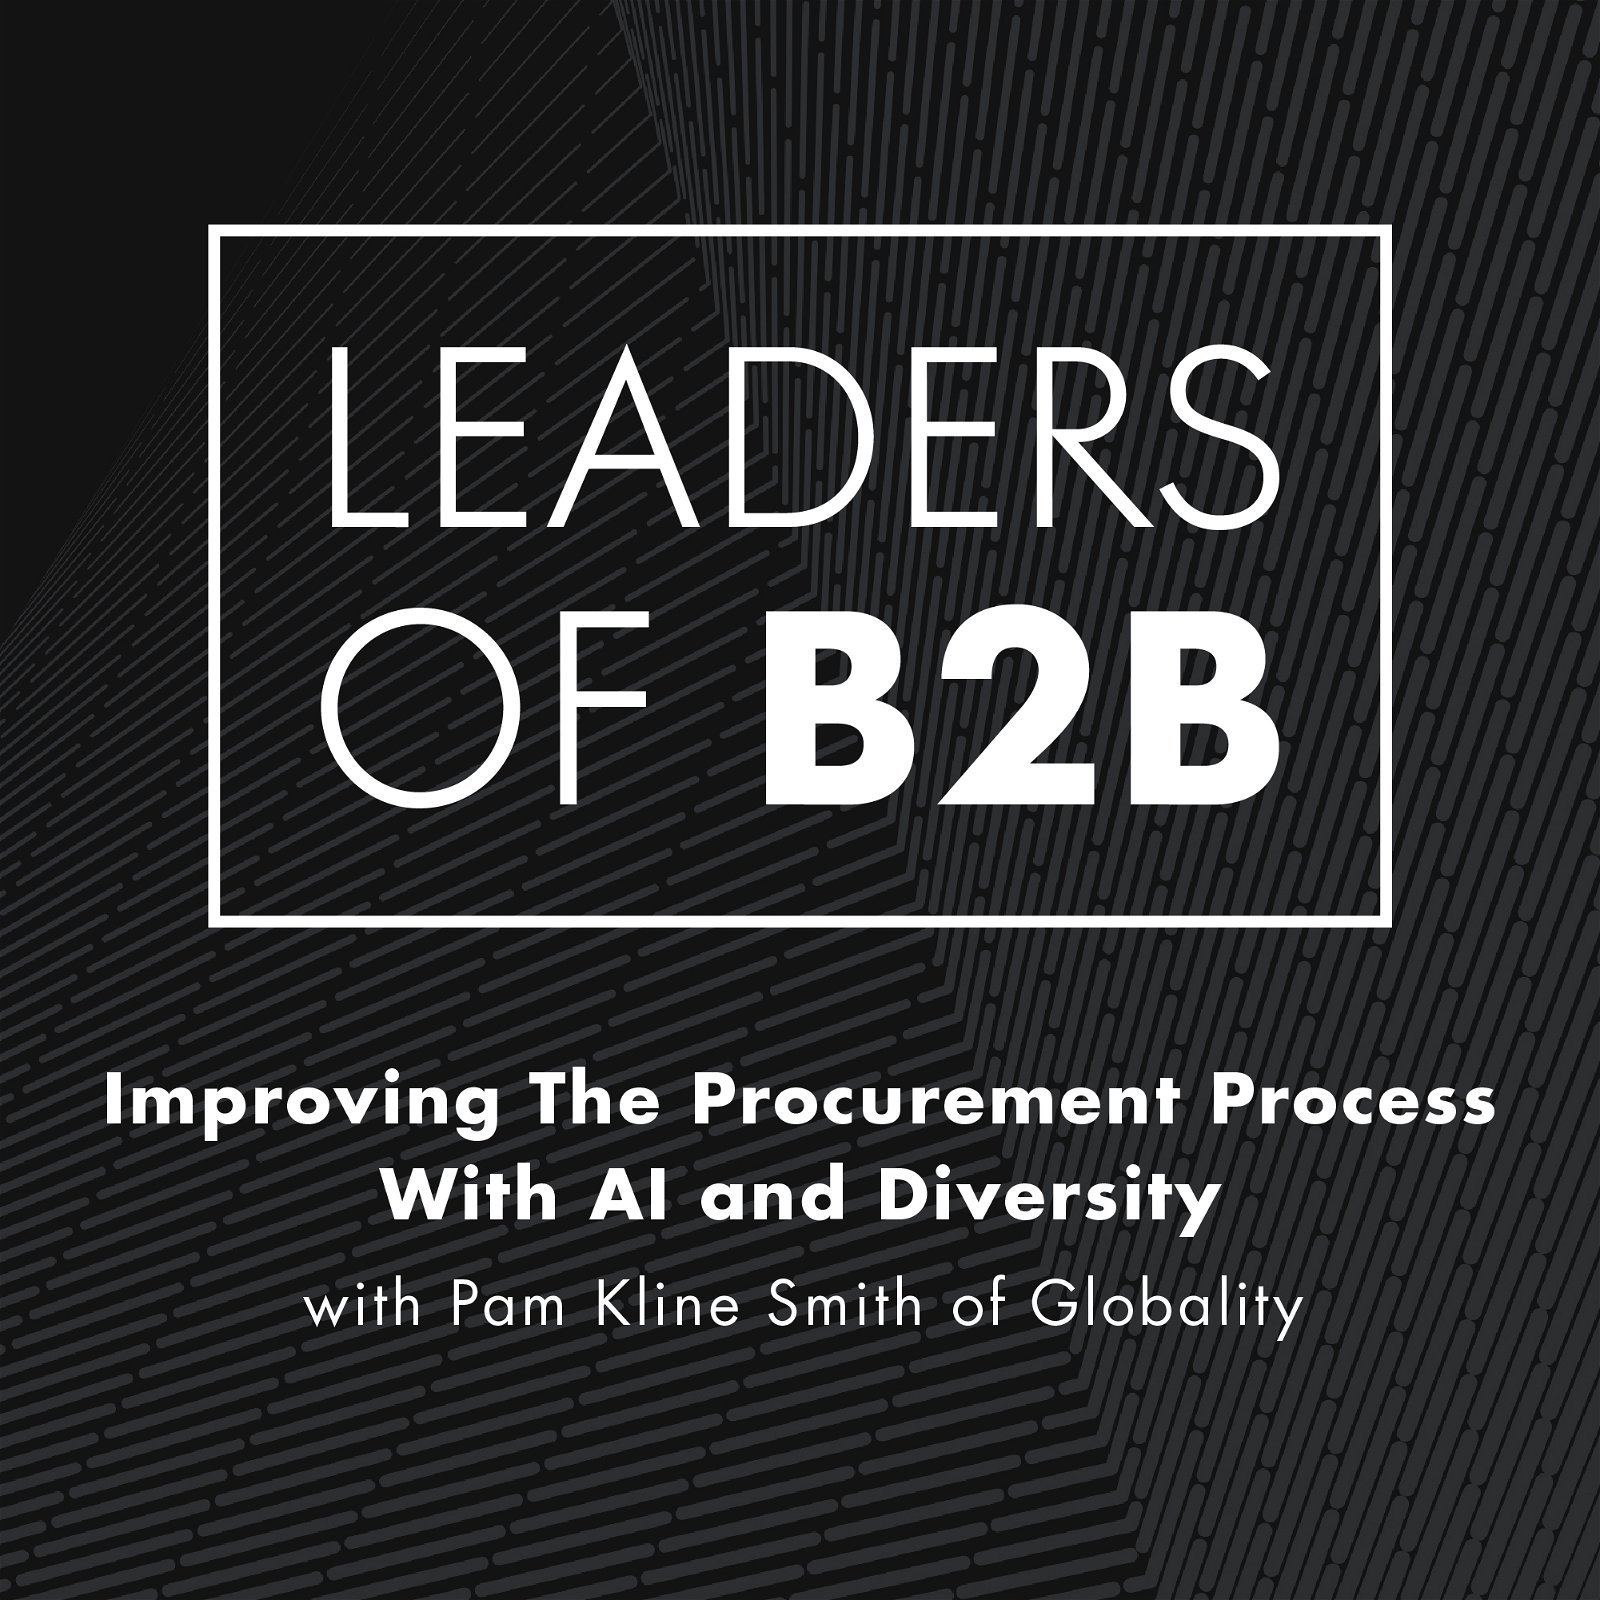 Improving The Procurement Process With AI and Diversity with Pam Kline Smith of Globality